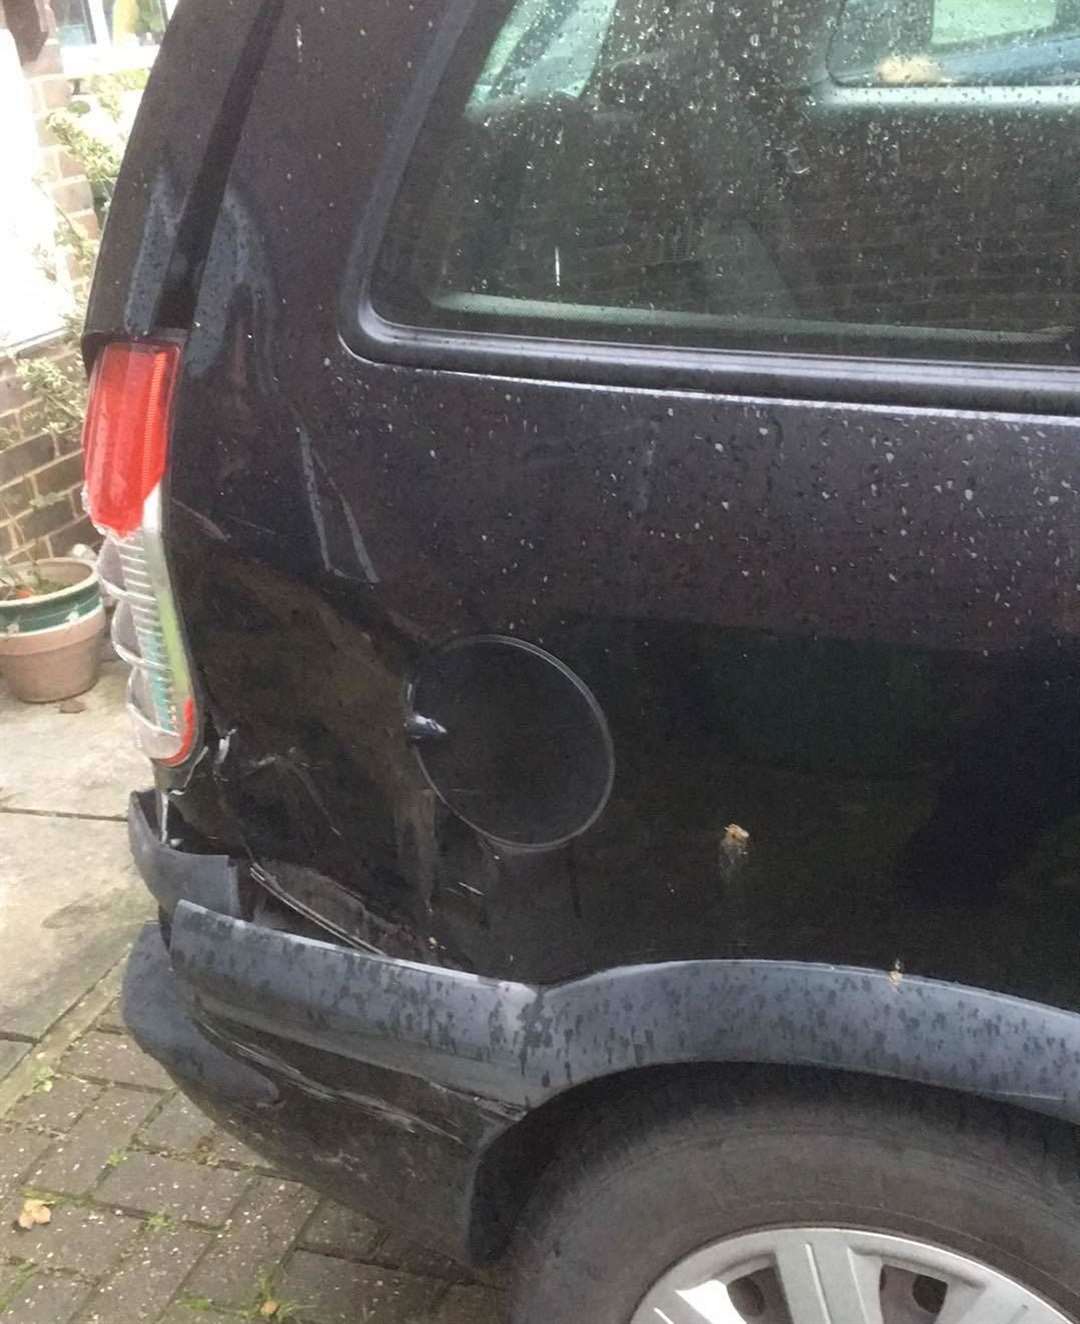 The car damaged in the theft has been written off